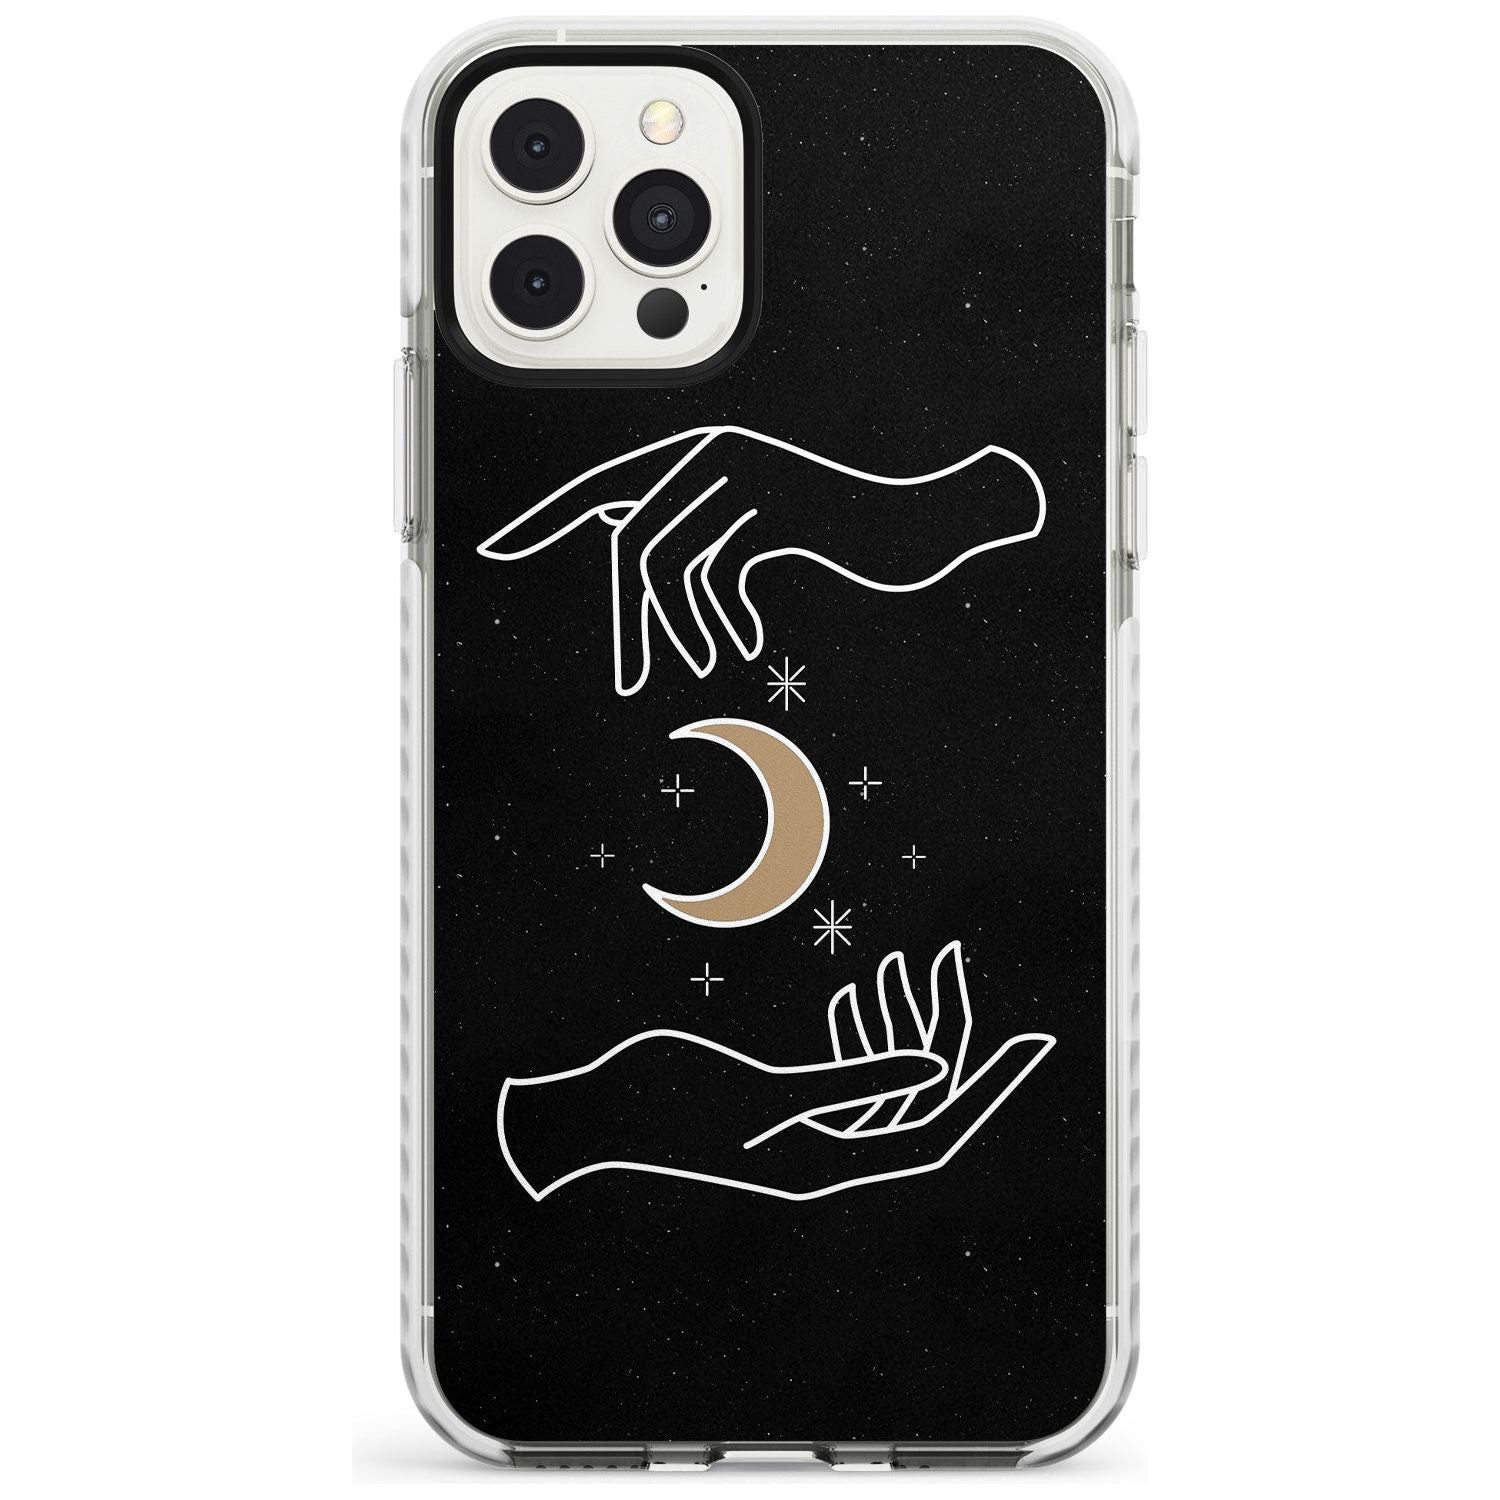 Hands Surrounding Moon Slim TPU Phone Case for iPhone 11 Pro Max